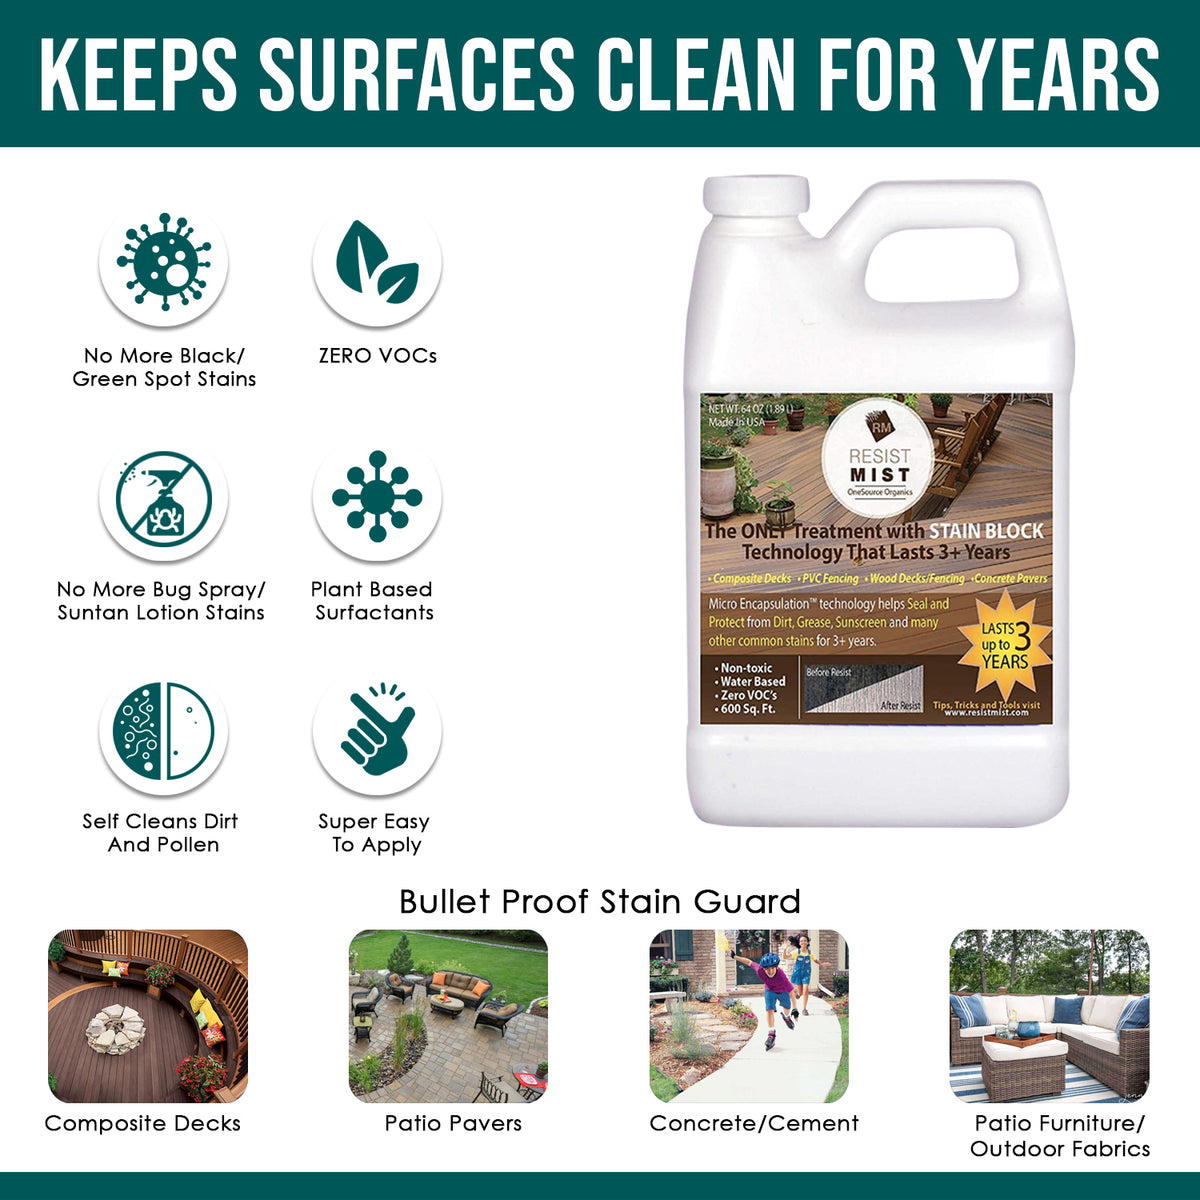 Keep Clean your surface with Composite Deck Armor™ 600 SF + Cleaner Kit